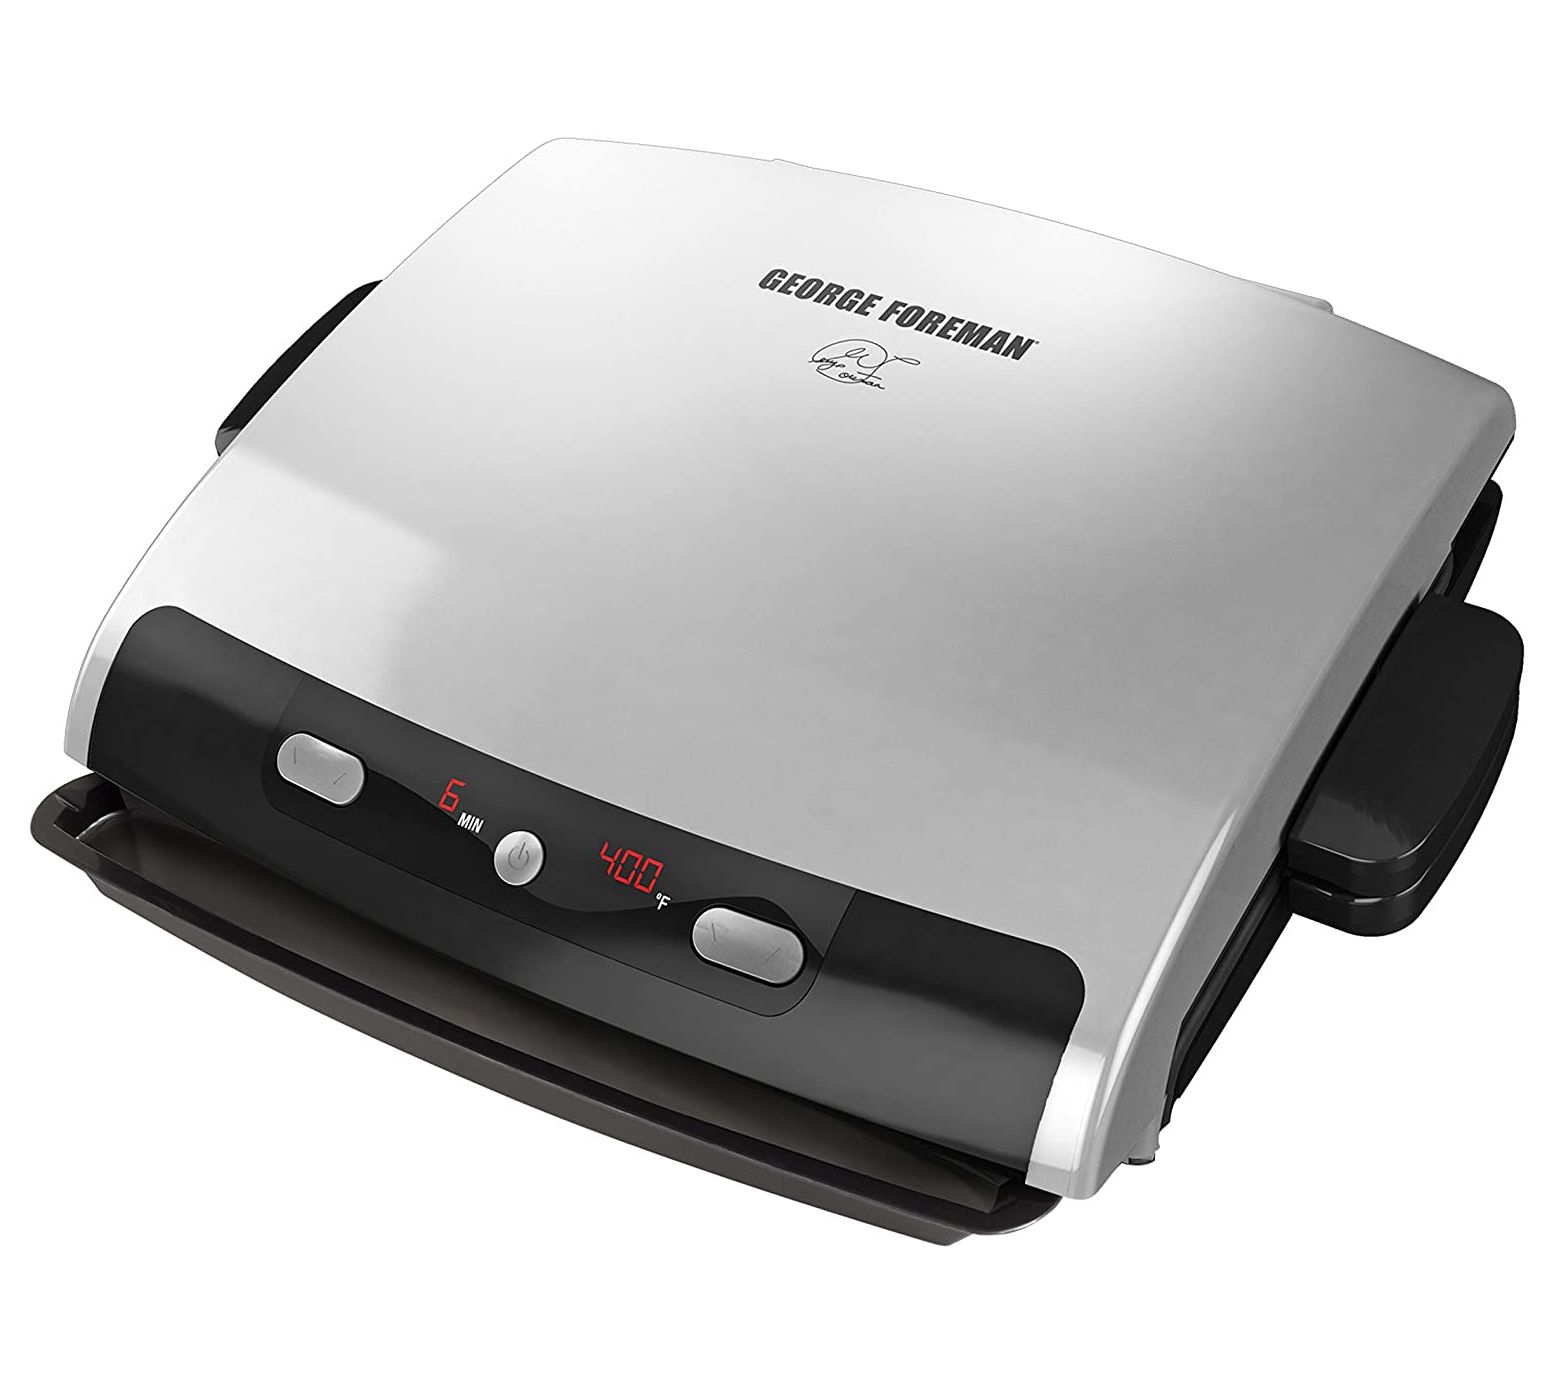 George Foreman 15 Serving Indoor/Outdoor Electric Grill with David